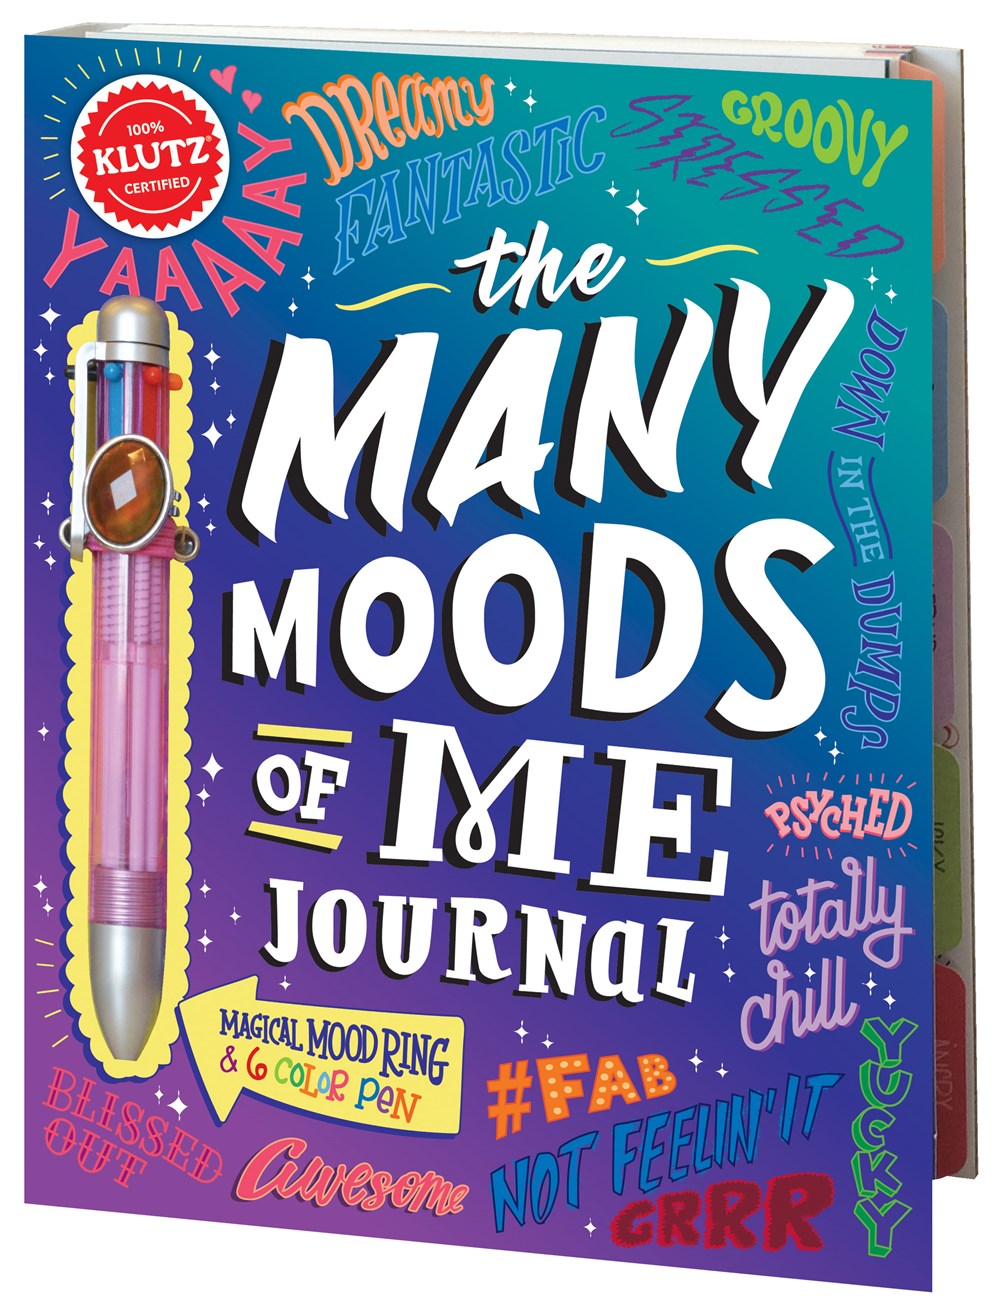 The Many Moods of Me Journal